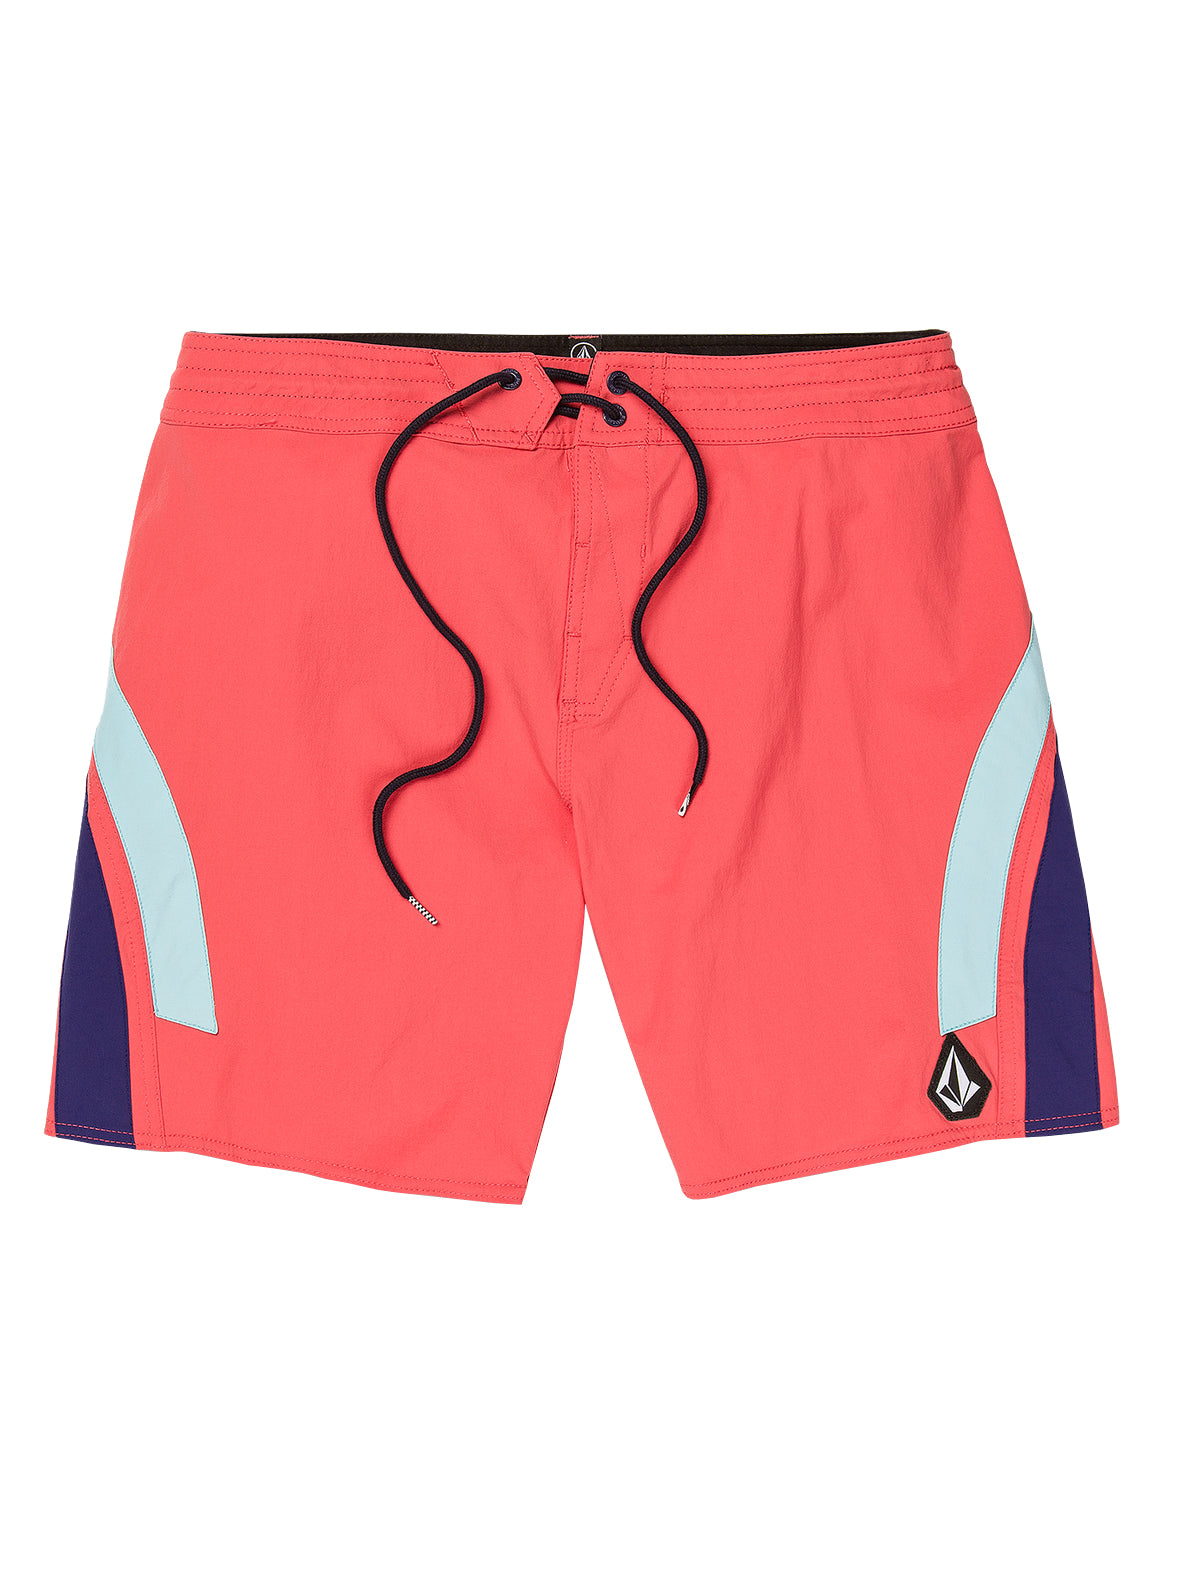 Volcom Arched Liberator Trunks CAY 33